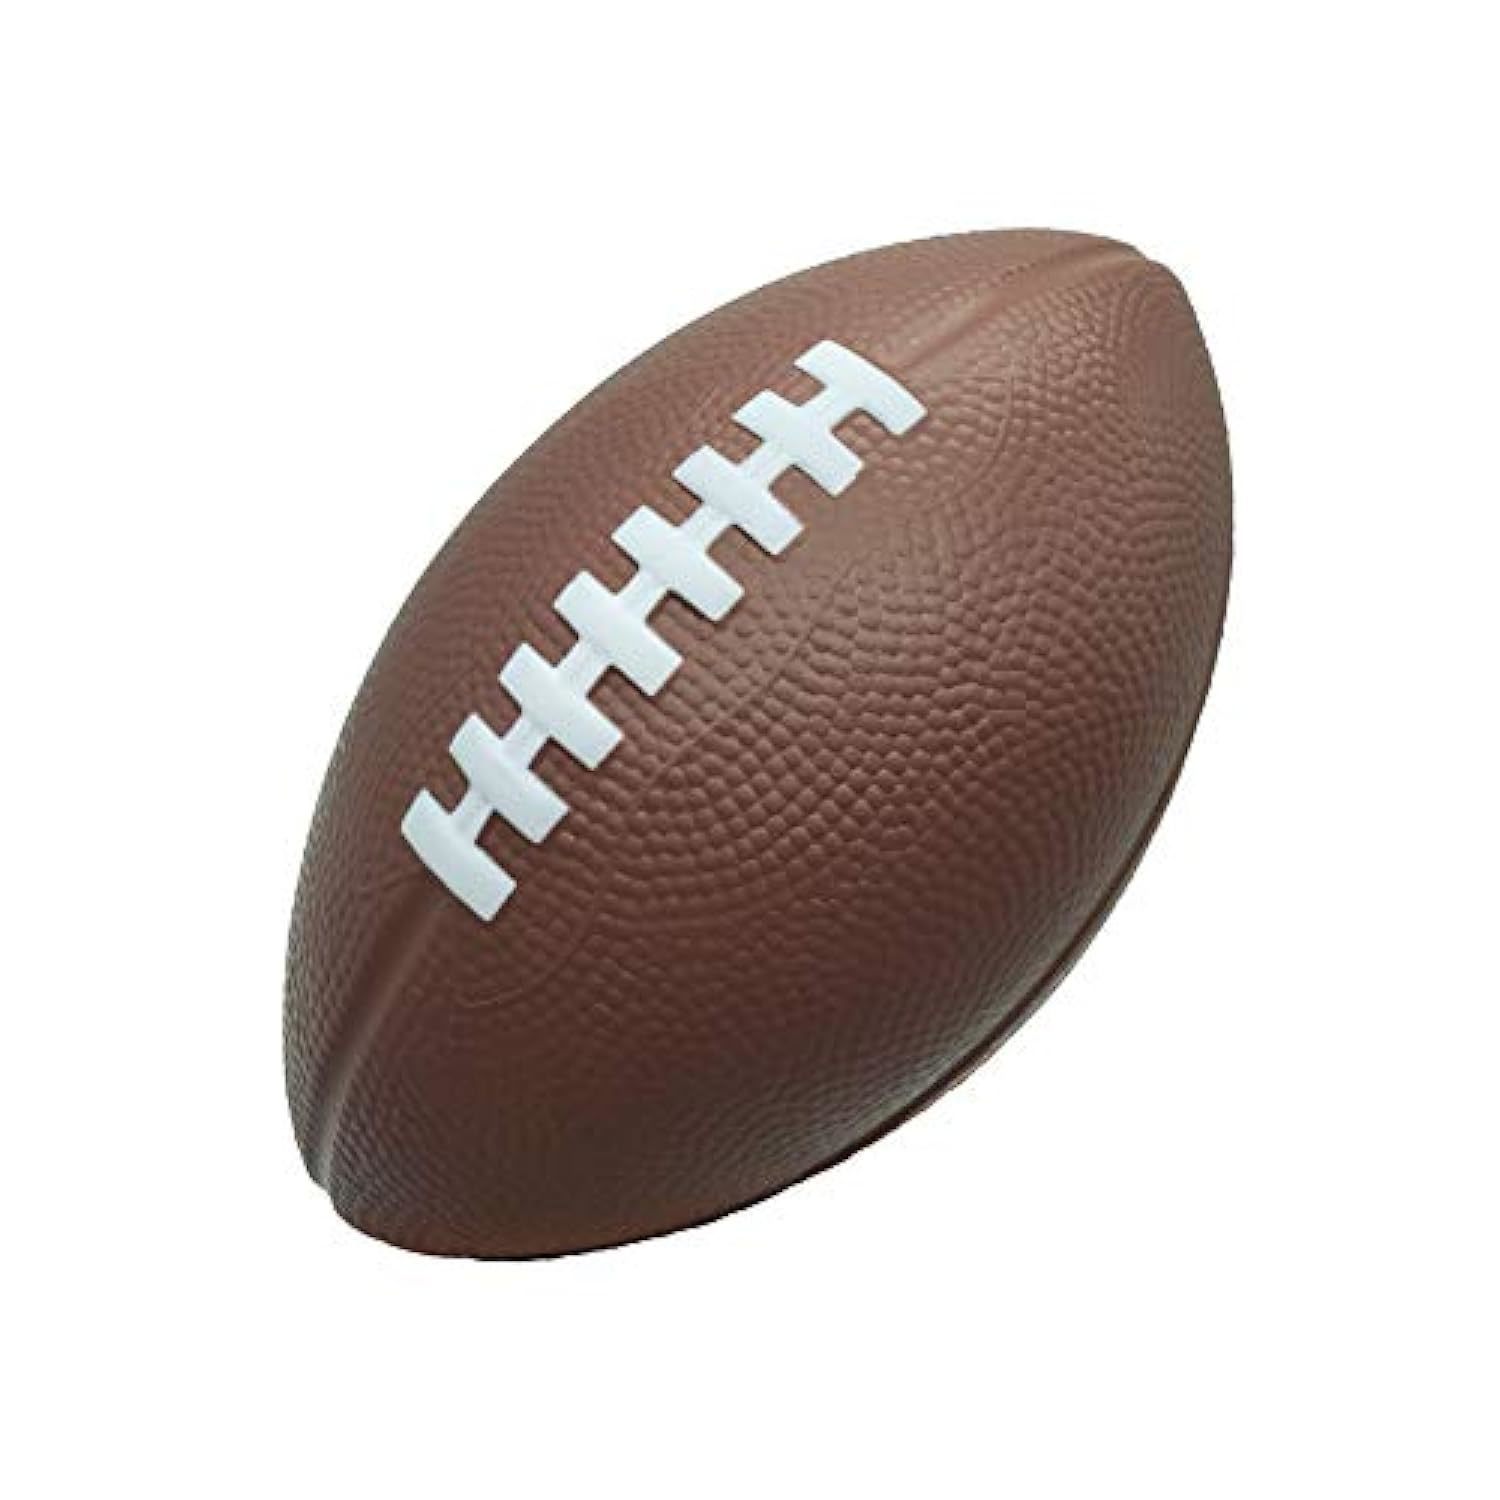 Primary image for Foam Football - 7.25" Easy Grip Small Football For Kids - Kids Football Youth Si